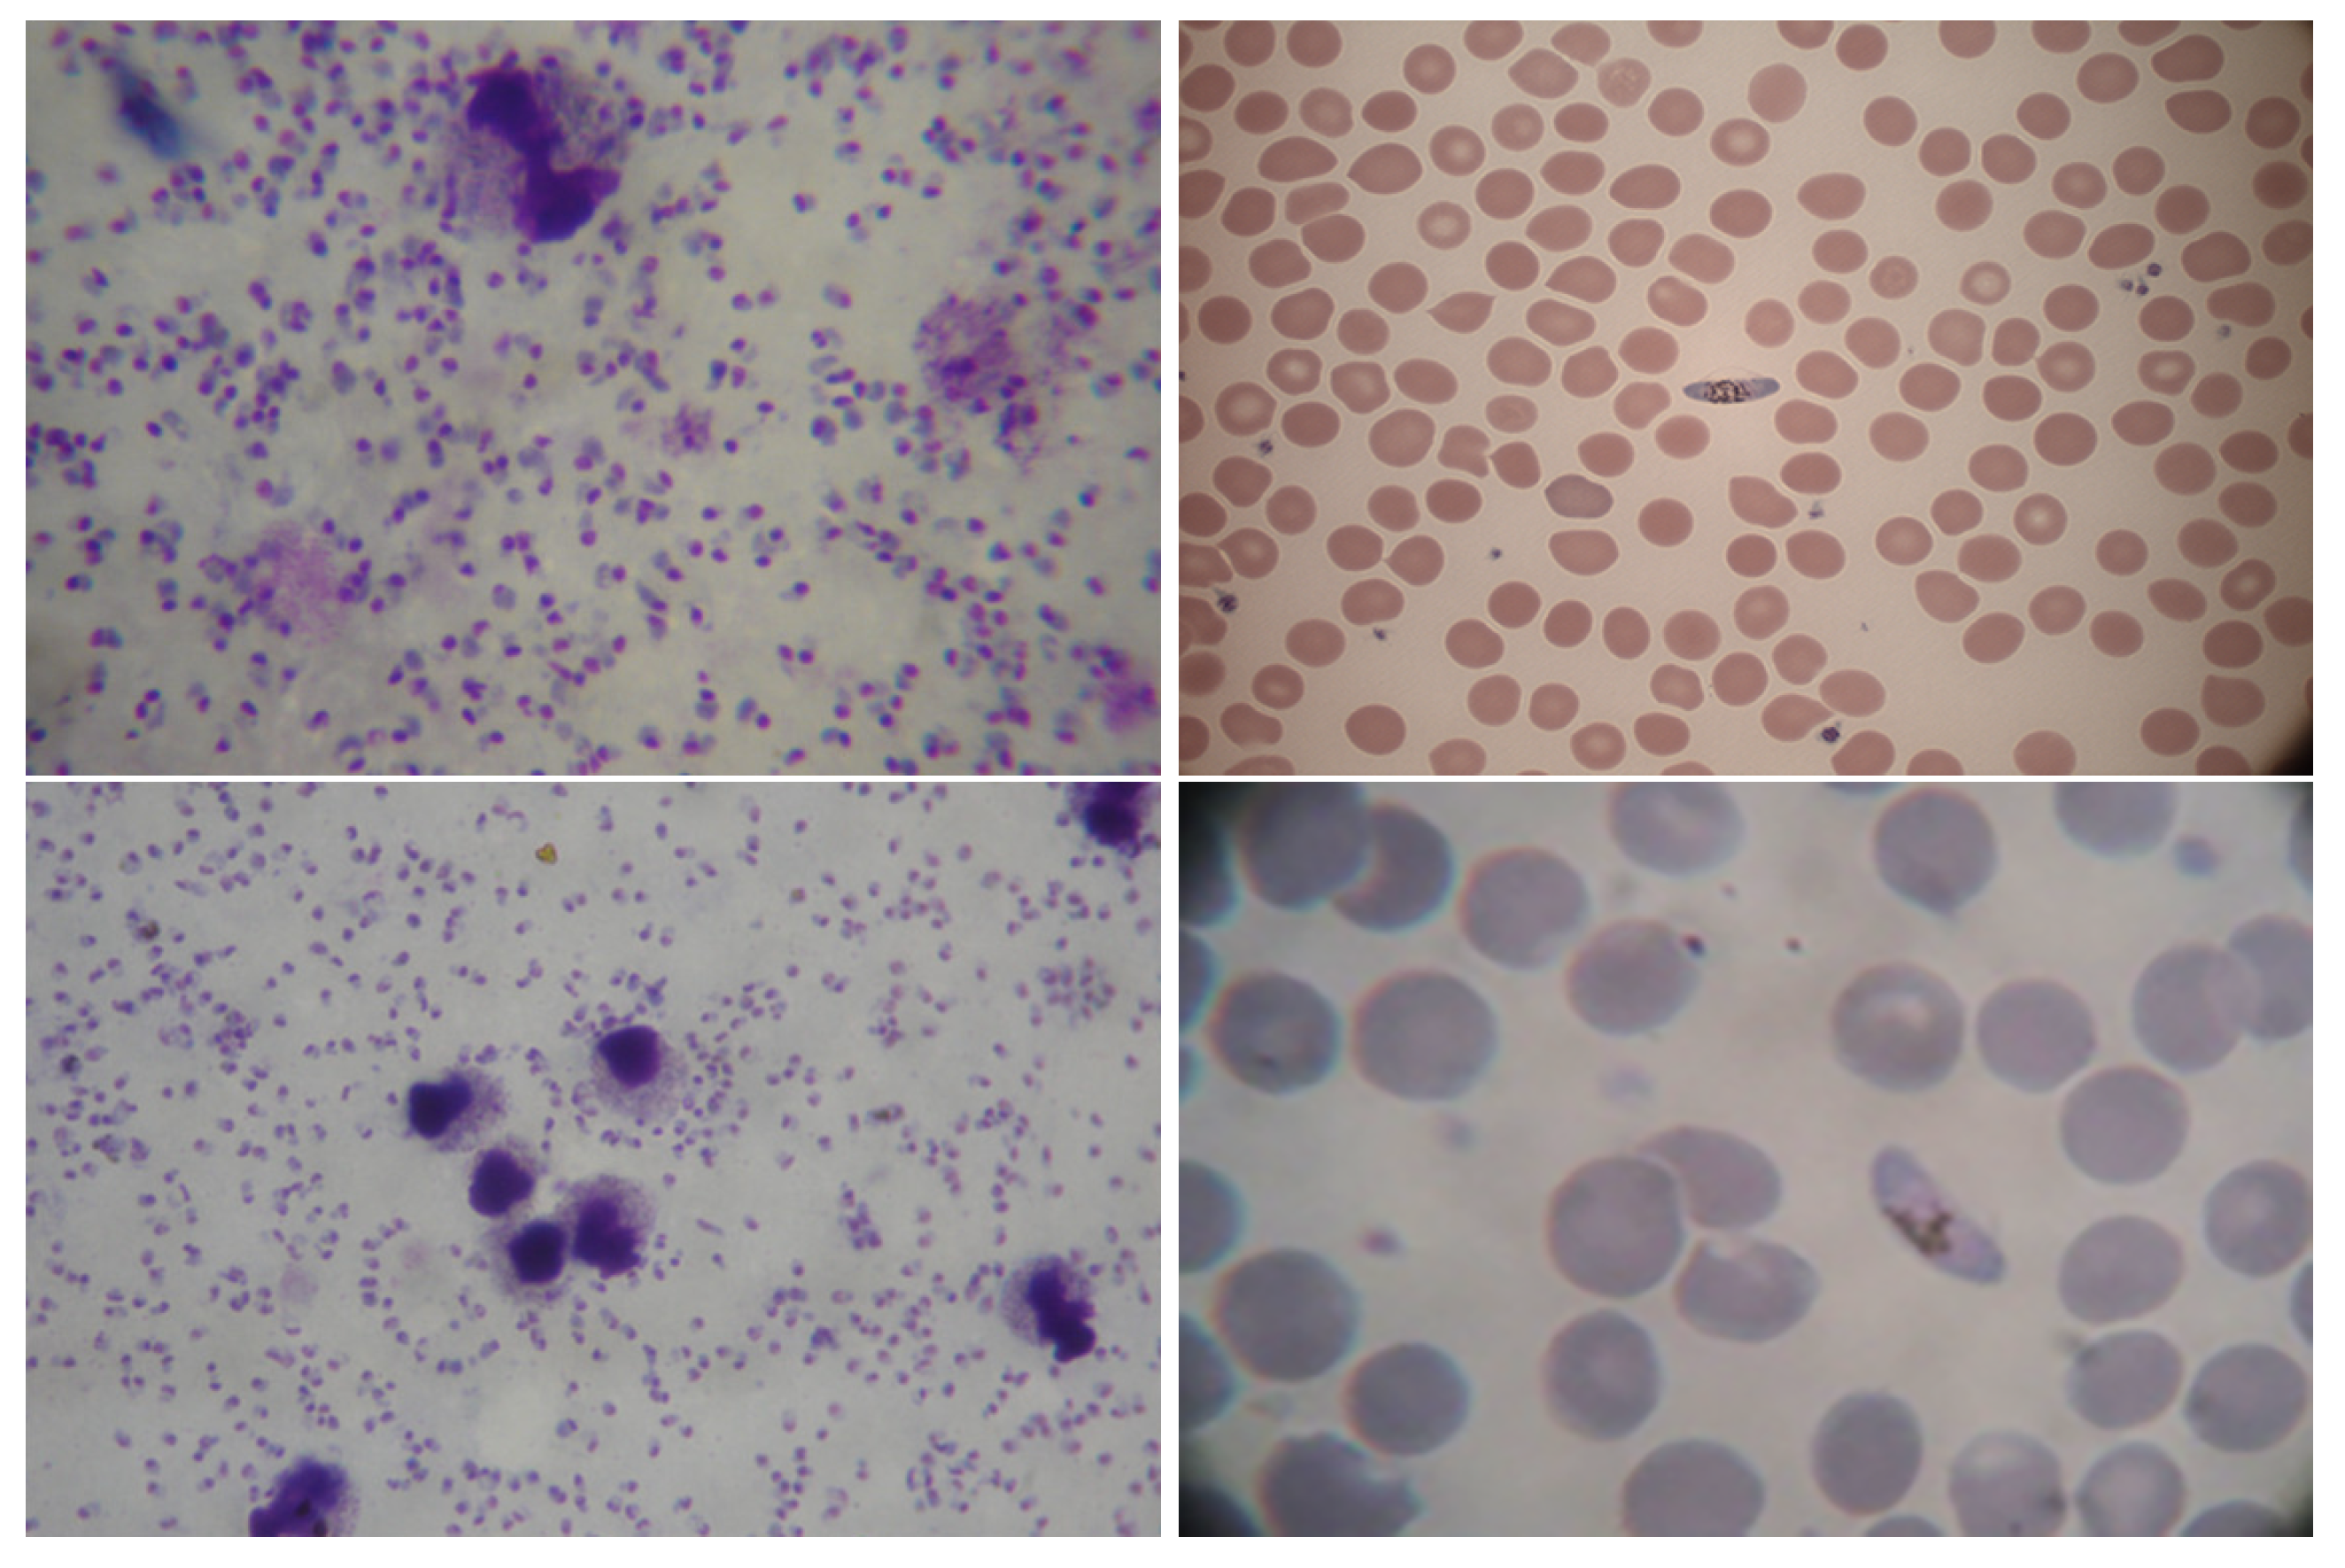 Image enhancement and segmentation using dark stretching technique for  Plasmodium Falciparum for thick blood smear